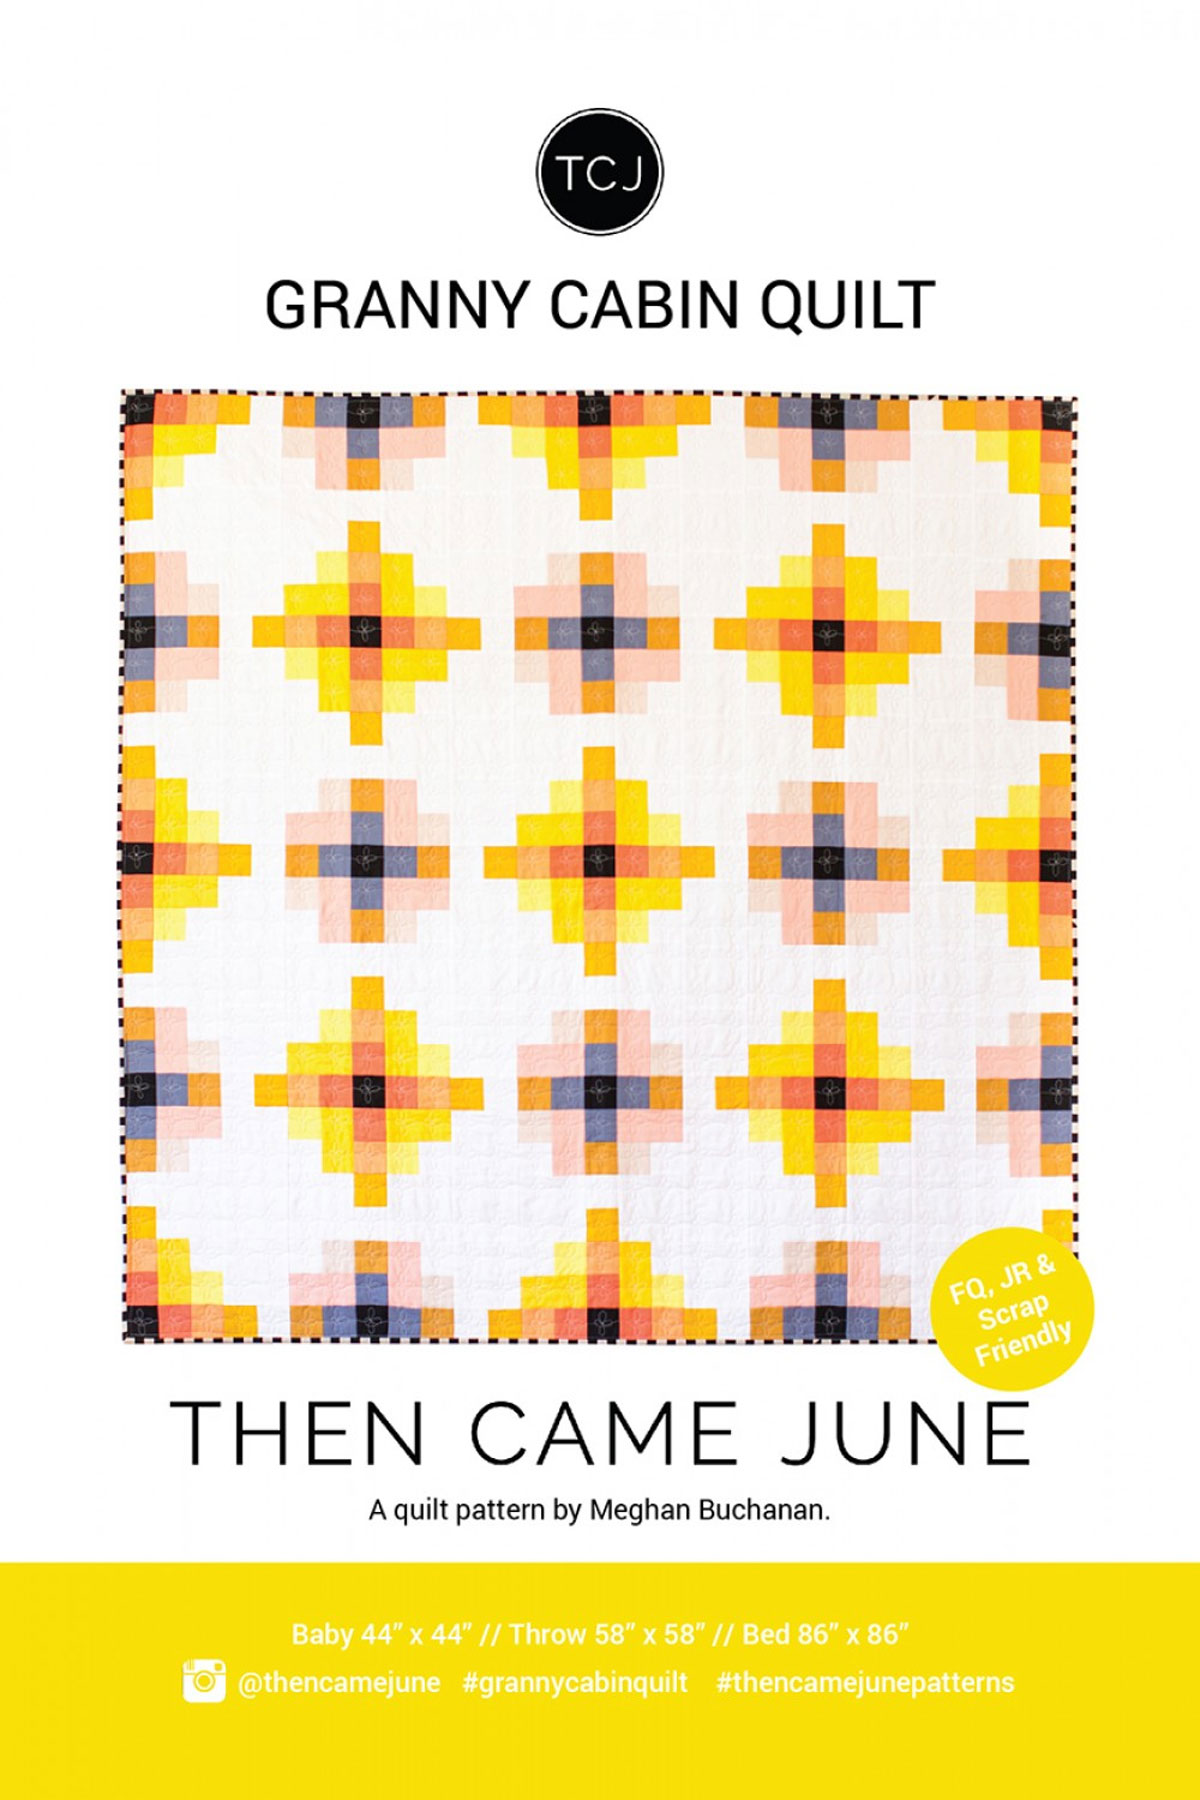 Granny-Cabin-quilt-sewing-pattern-Then-Came-June-Meghan-Buchanan-front